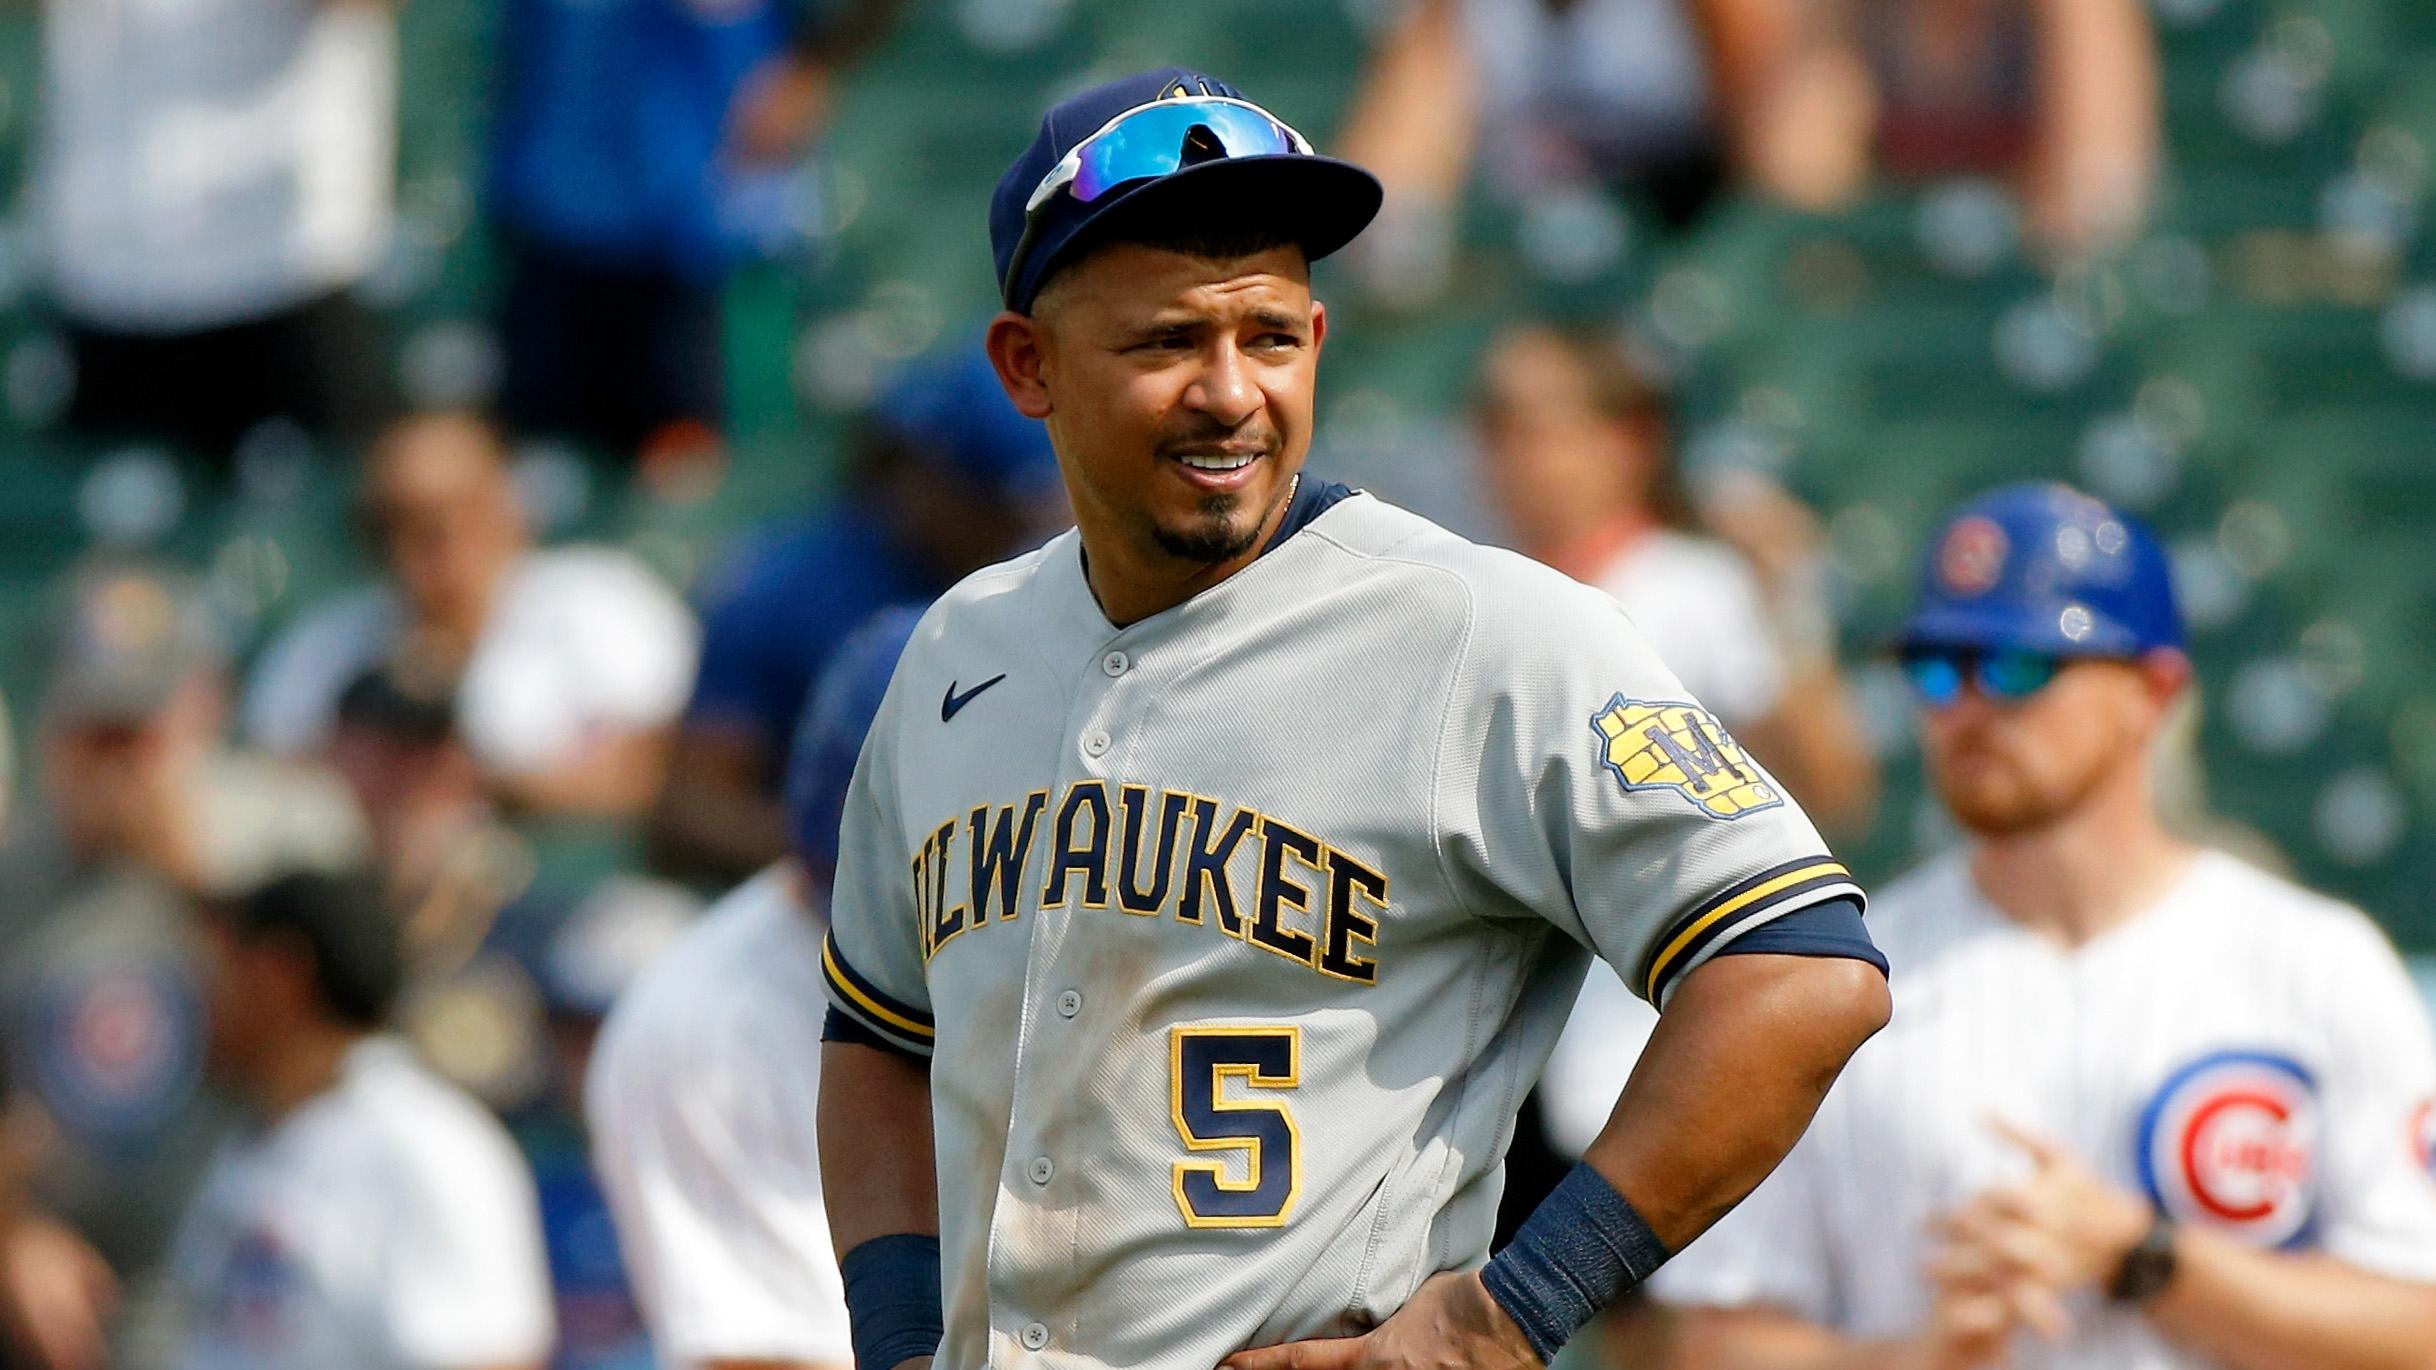 Aug 10, 2021; Chicago, Illinois, USA; Milwaukee Brewers first baseman Eduardo Escobar (5) reacts after a play against the Chicago Cubs during the seventh inning at Wrigley Field. / Jon Durr-USA TODAY Sports